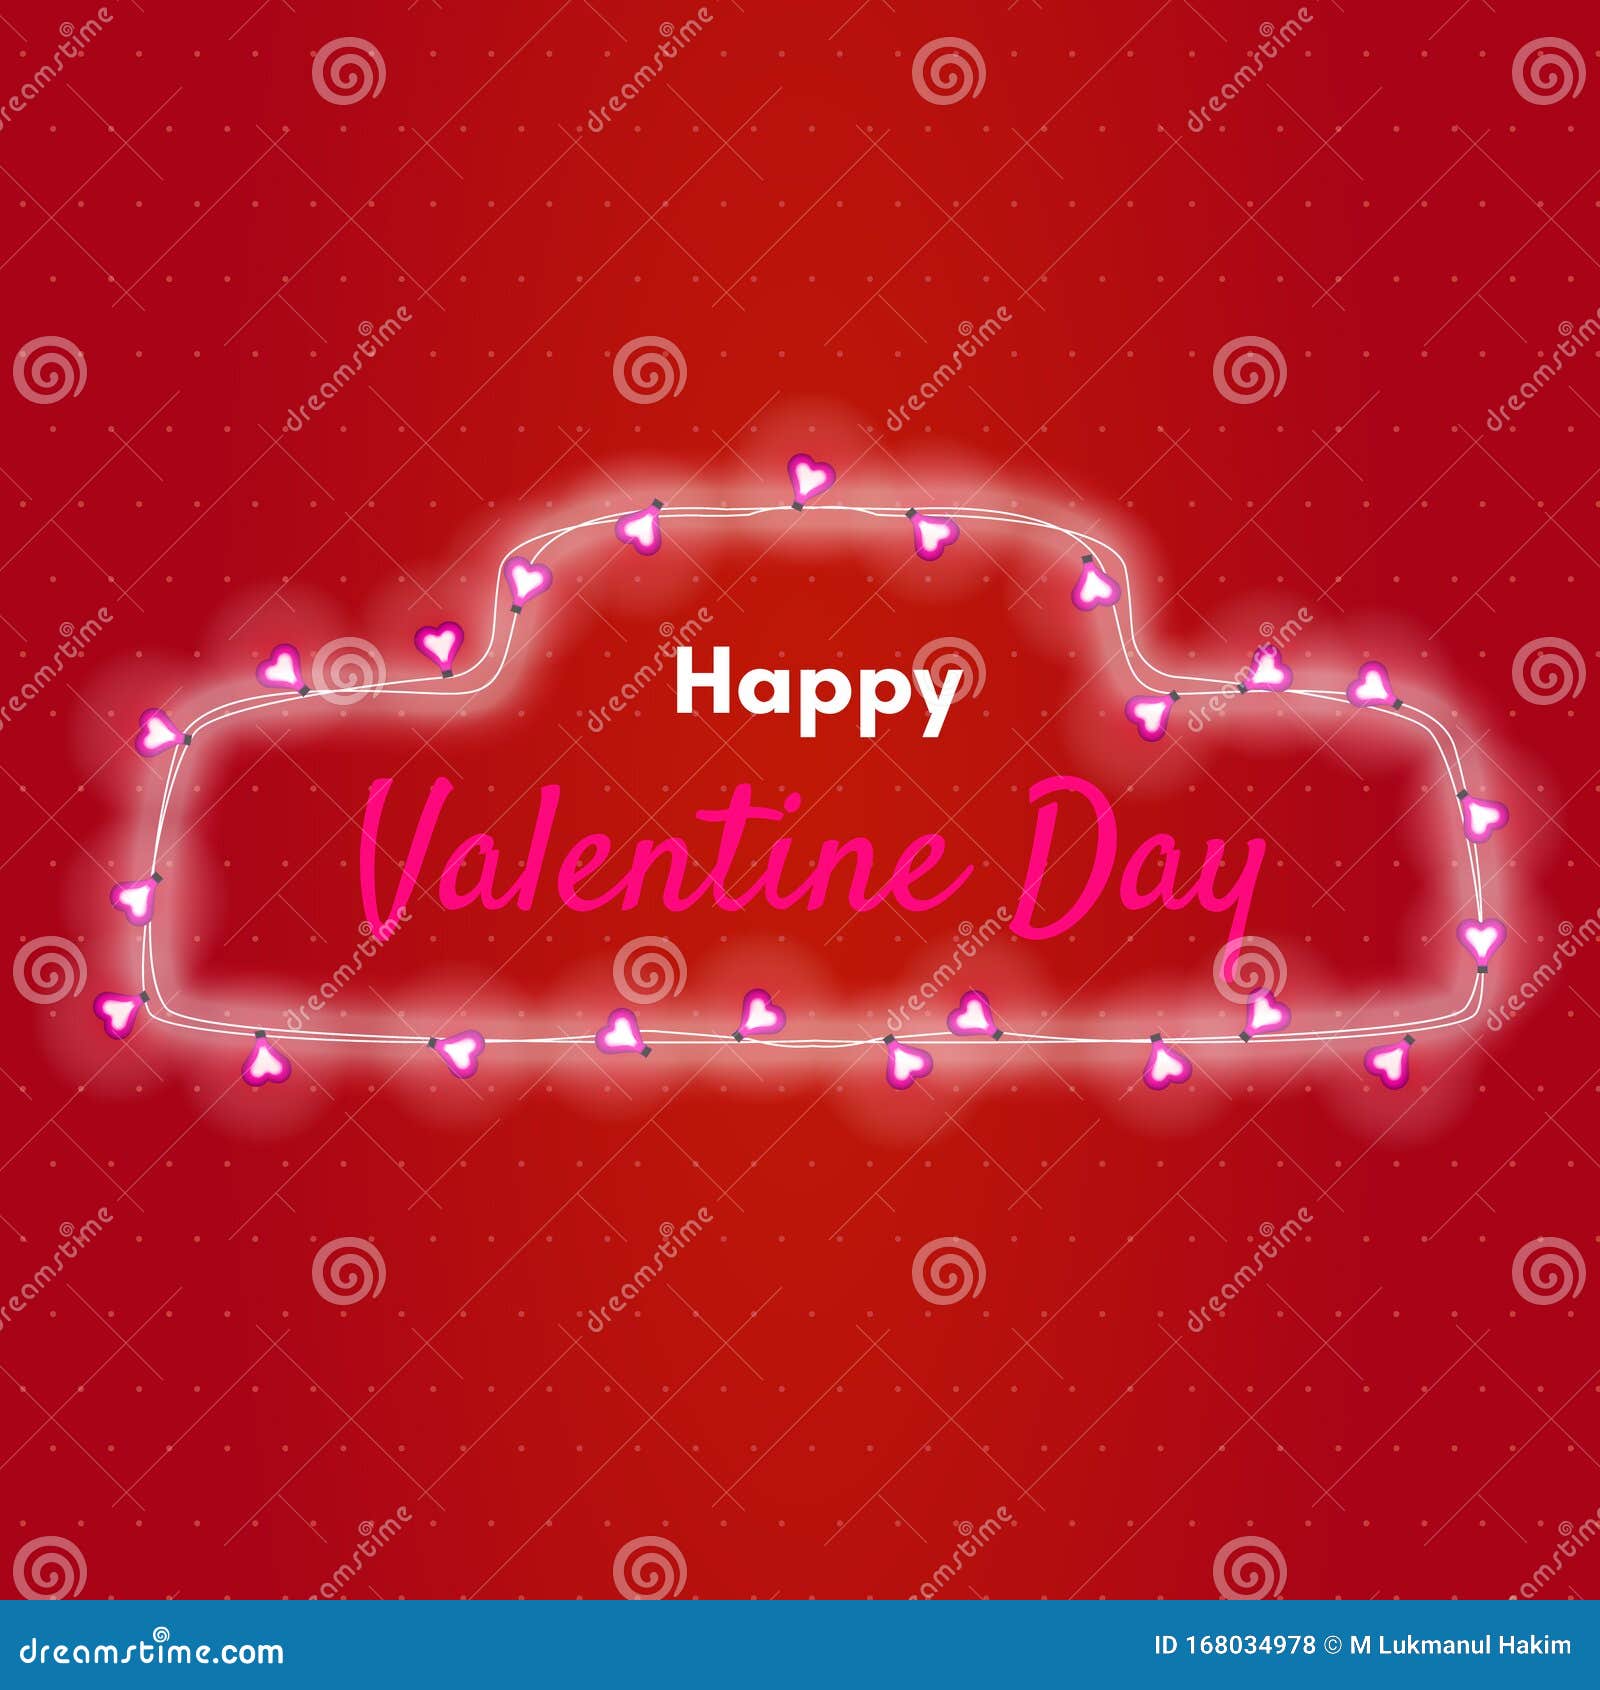 Aesthetic Square Background Happy Valentine Day with Lamp Love in Maroon  Color Modern Stock Vector - Illustration of header, hearts: 168034978